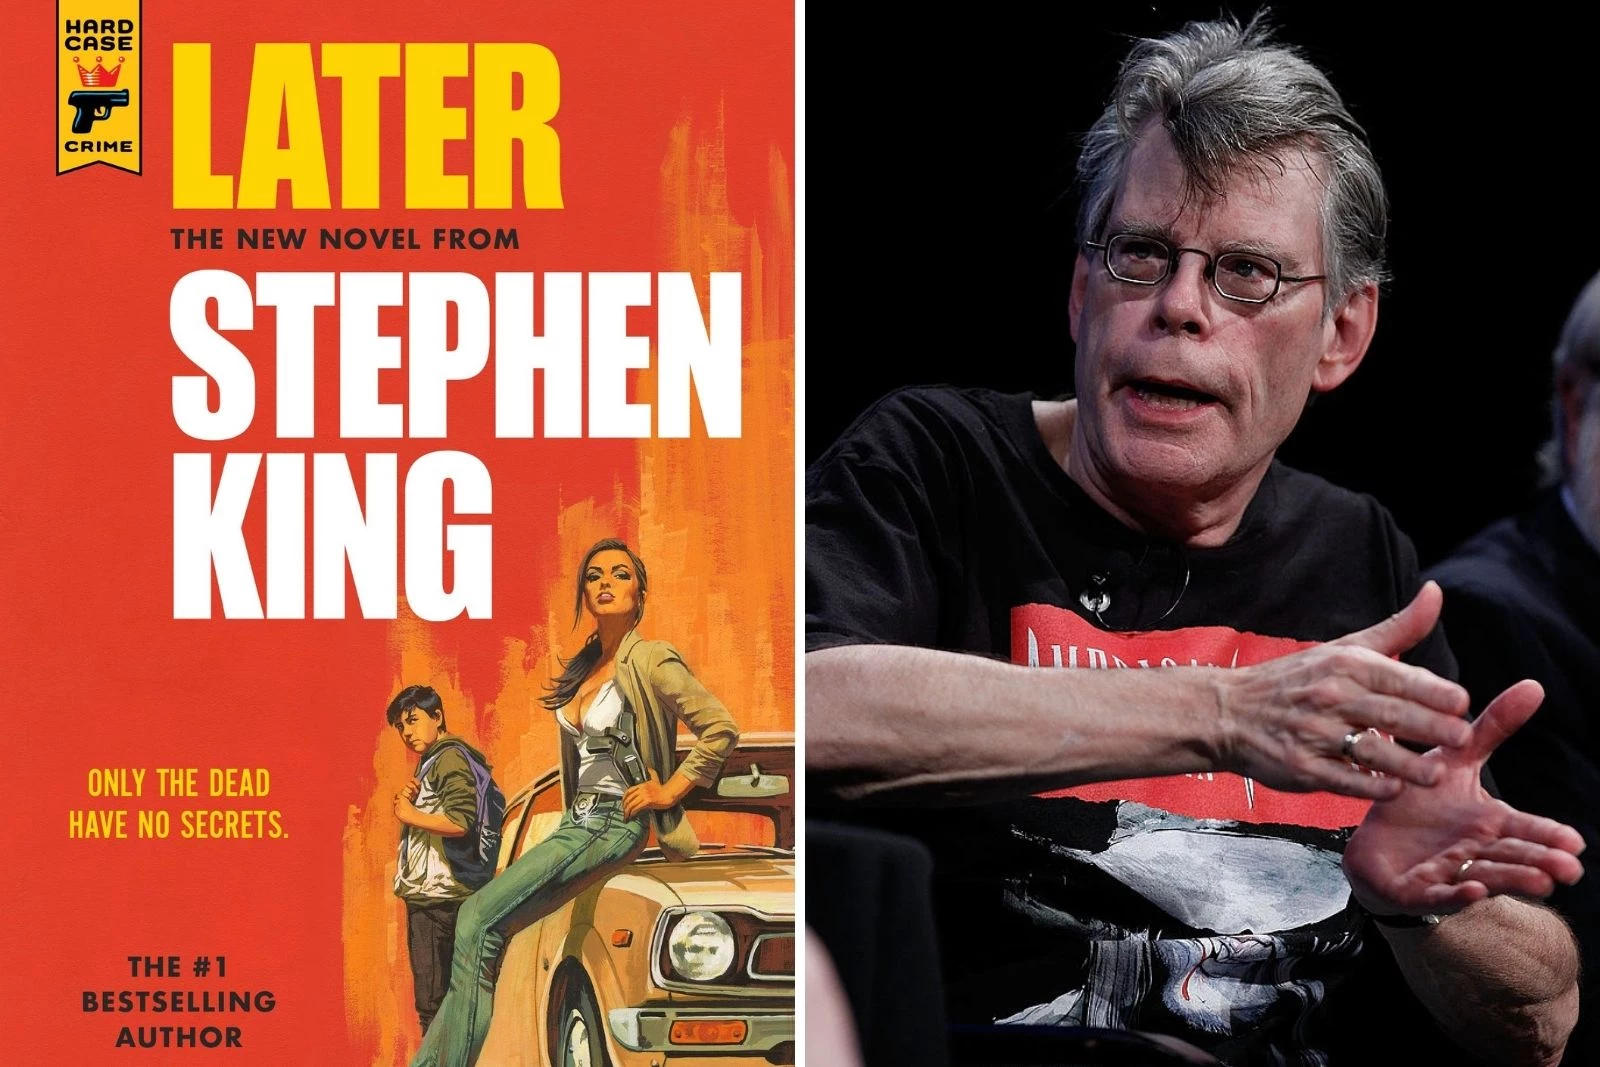 Does The New Stephen King Novel Later Have Links To Colorado